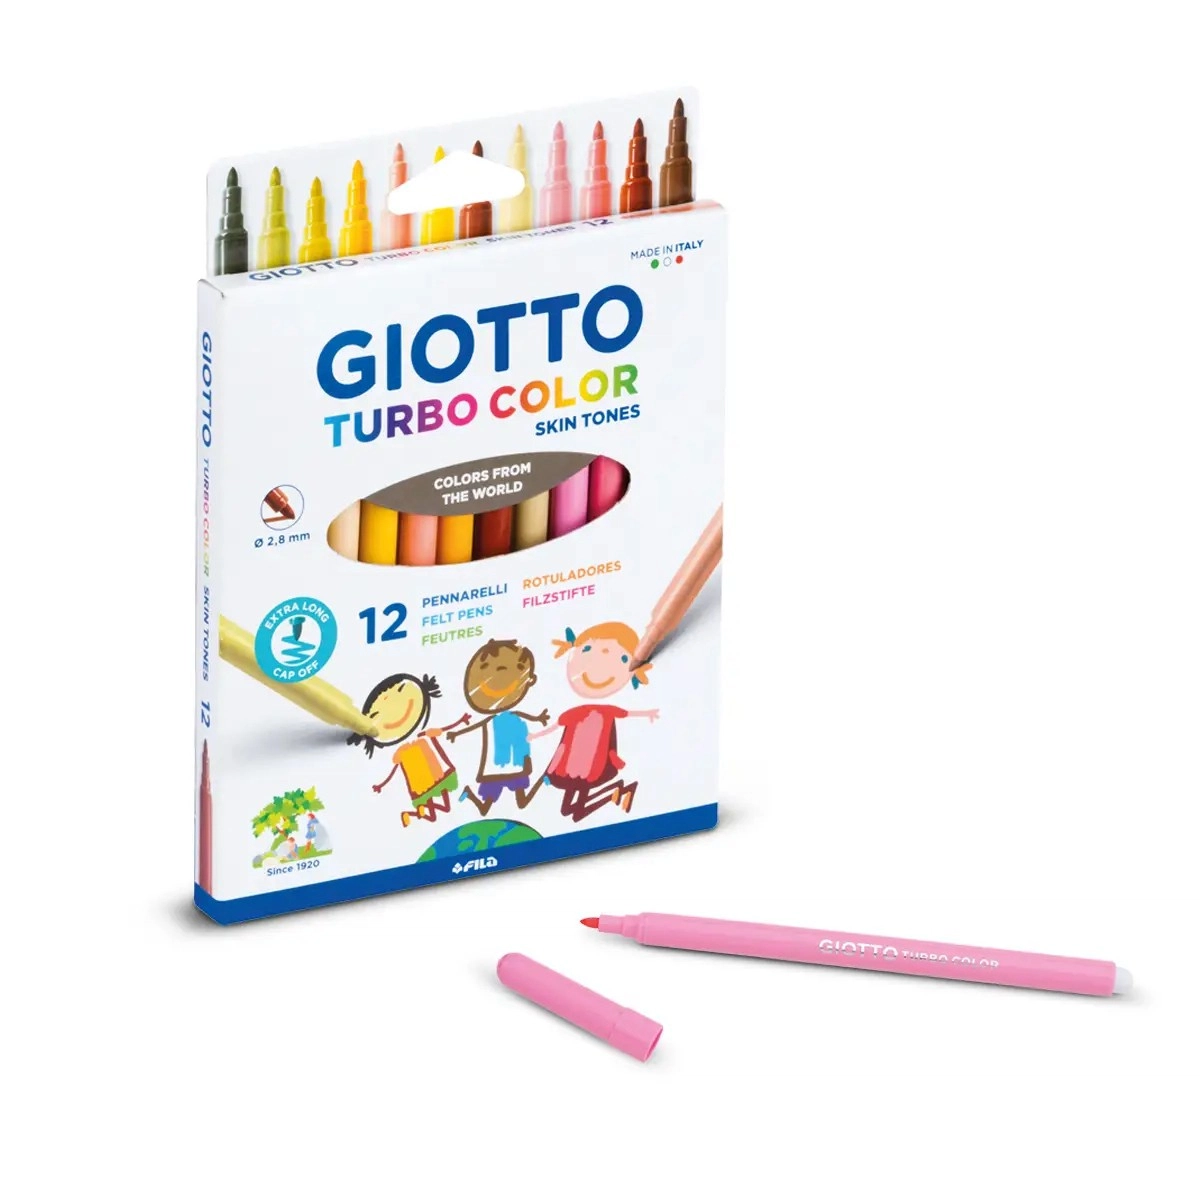 Magic Tri Stix 48 Color Markers (includes Global Skin Tones) by The Pencil  Grip